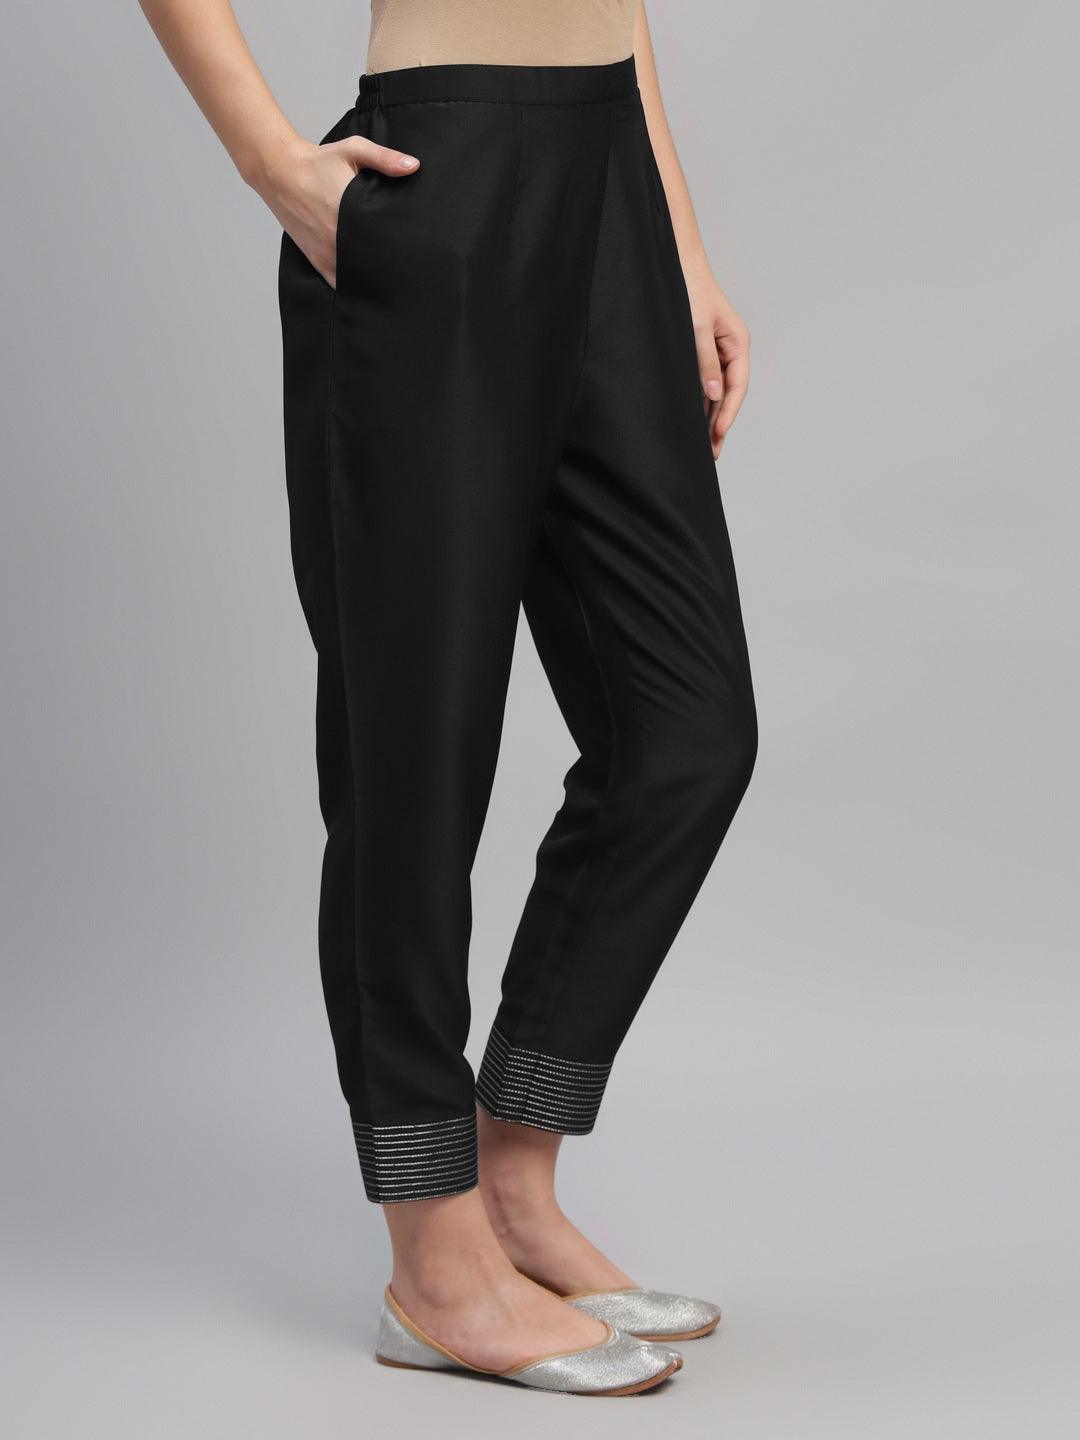 Black Solid Crepe Trousers - Libas